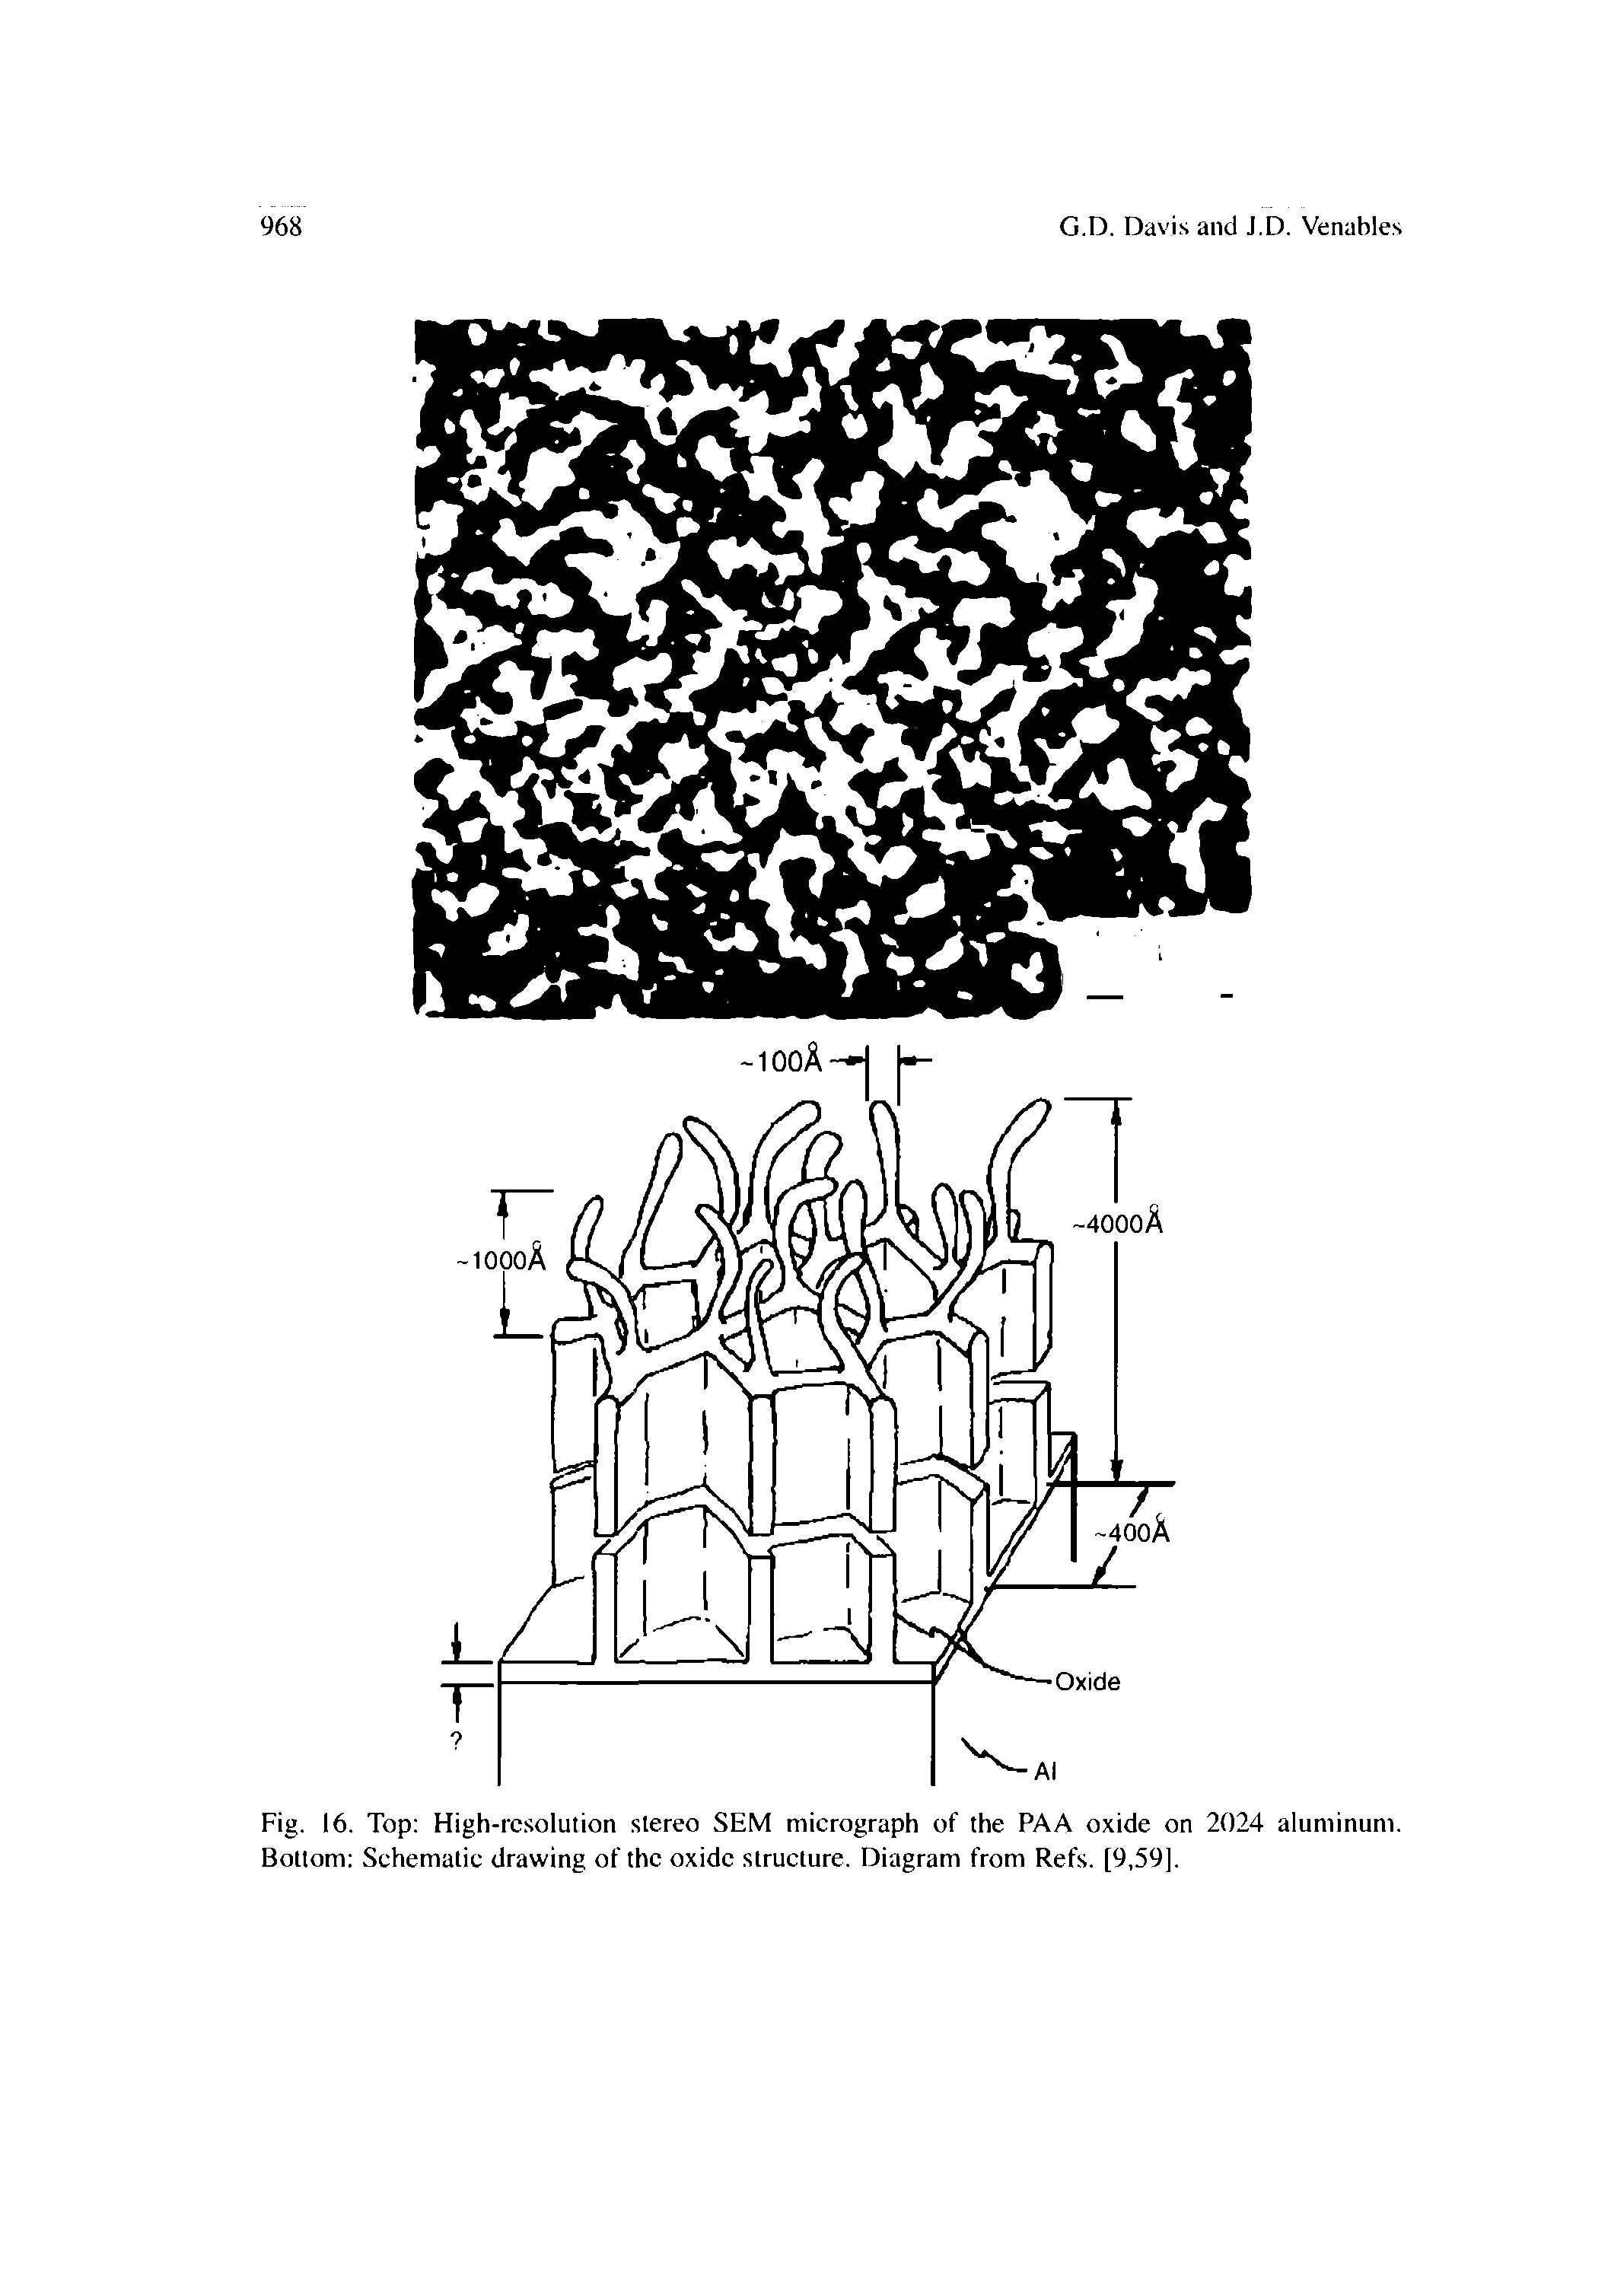 Fig. 16. Top High-rcsolution stereo SEM micrograph of the PAA oxide on 2024 aluminum. Bottom Schematic drawing of the oxide structure. Diagram from Refs. [9,59].